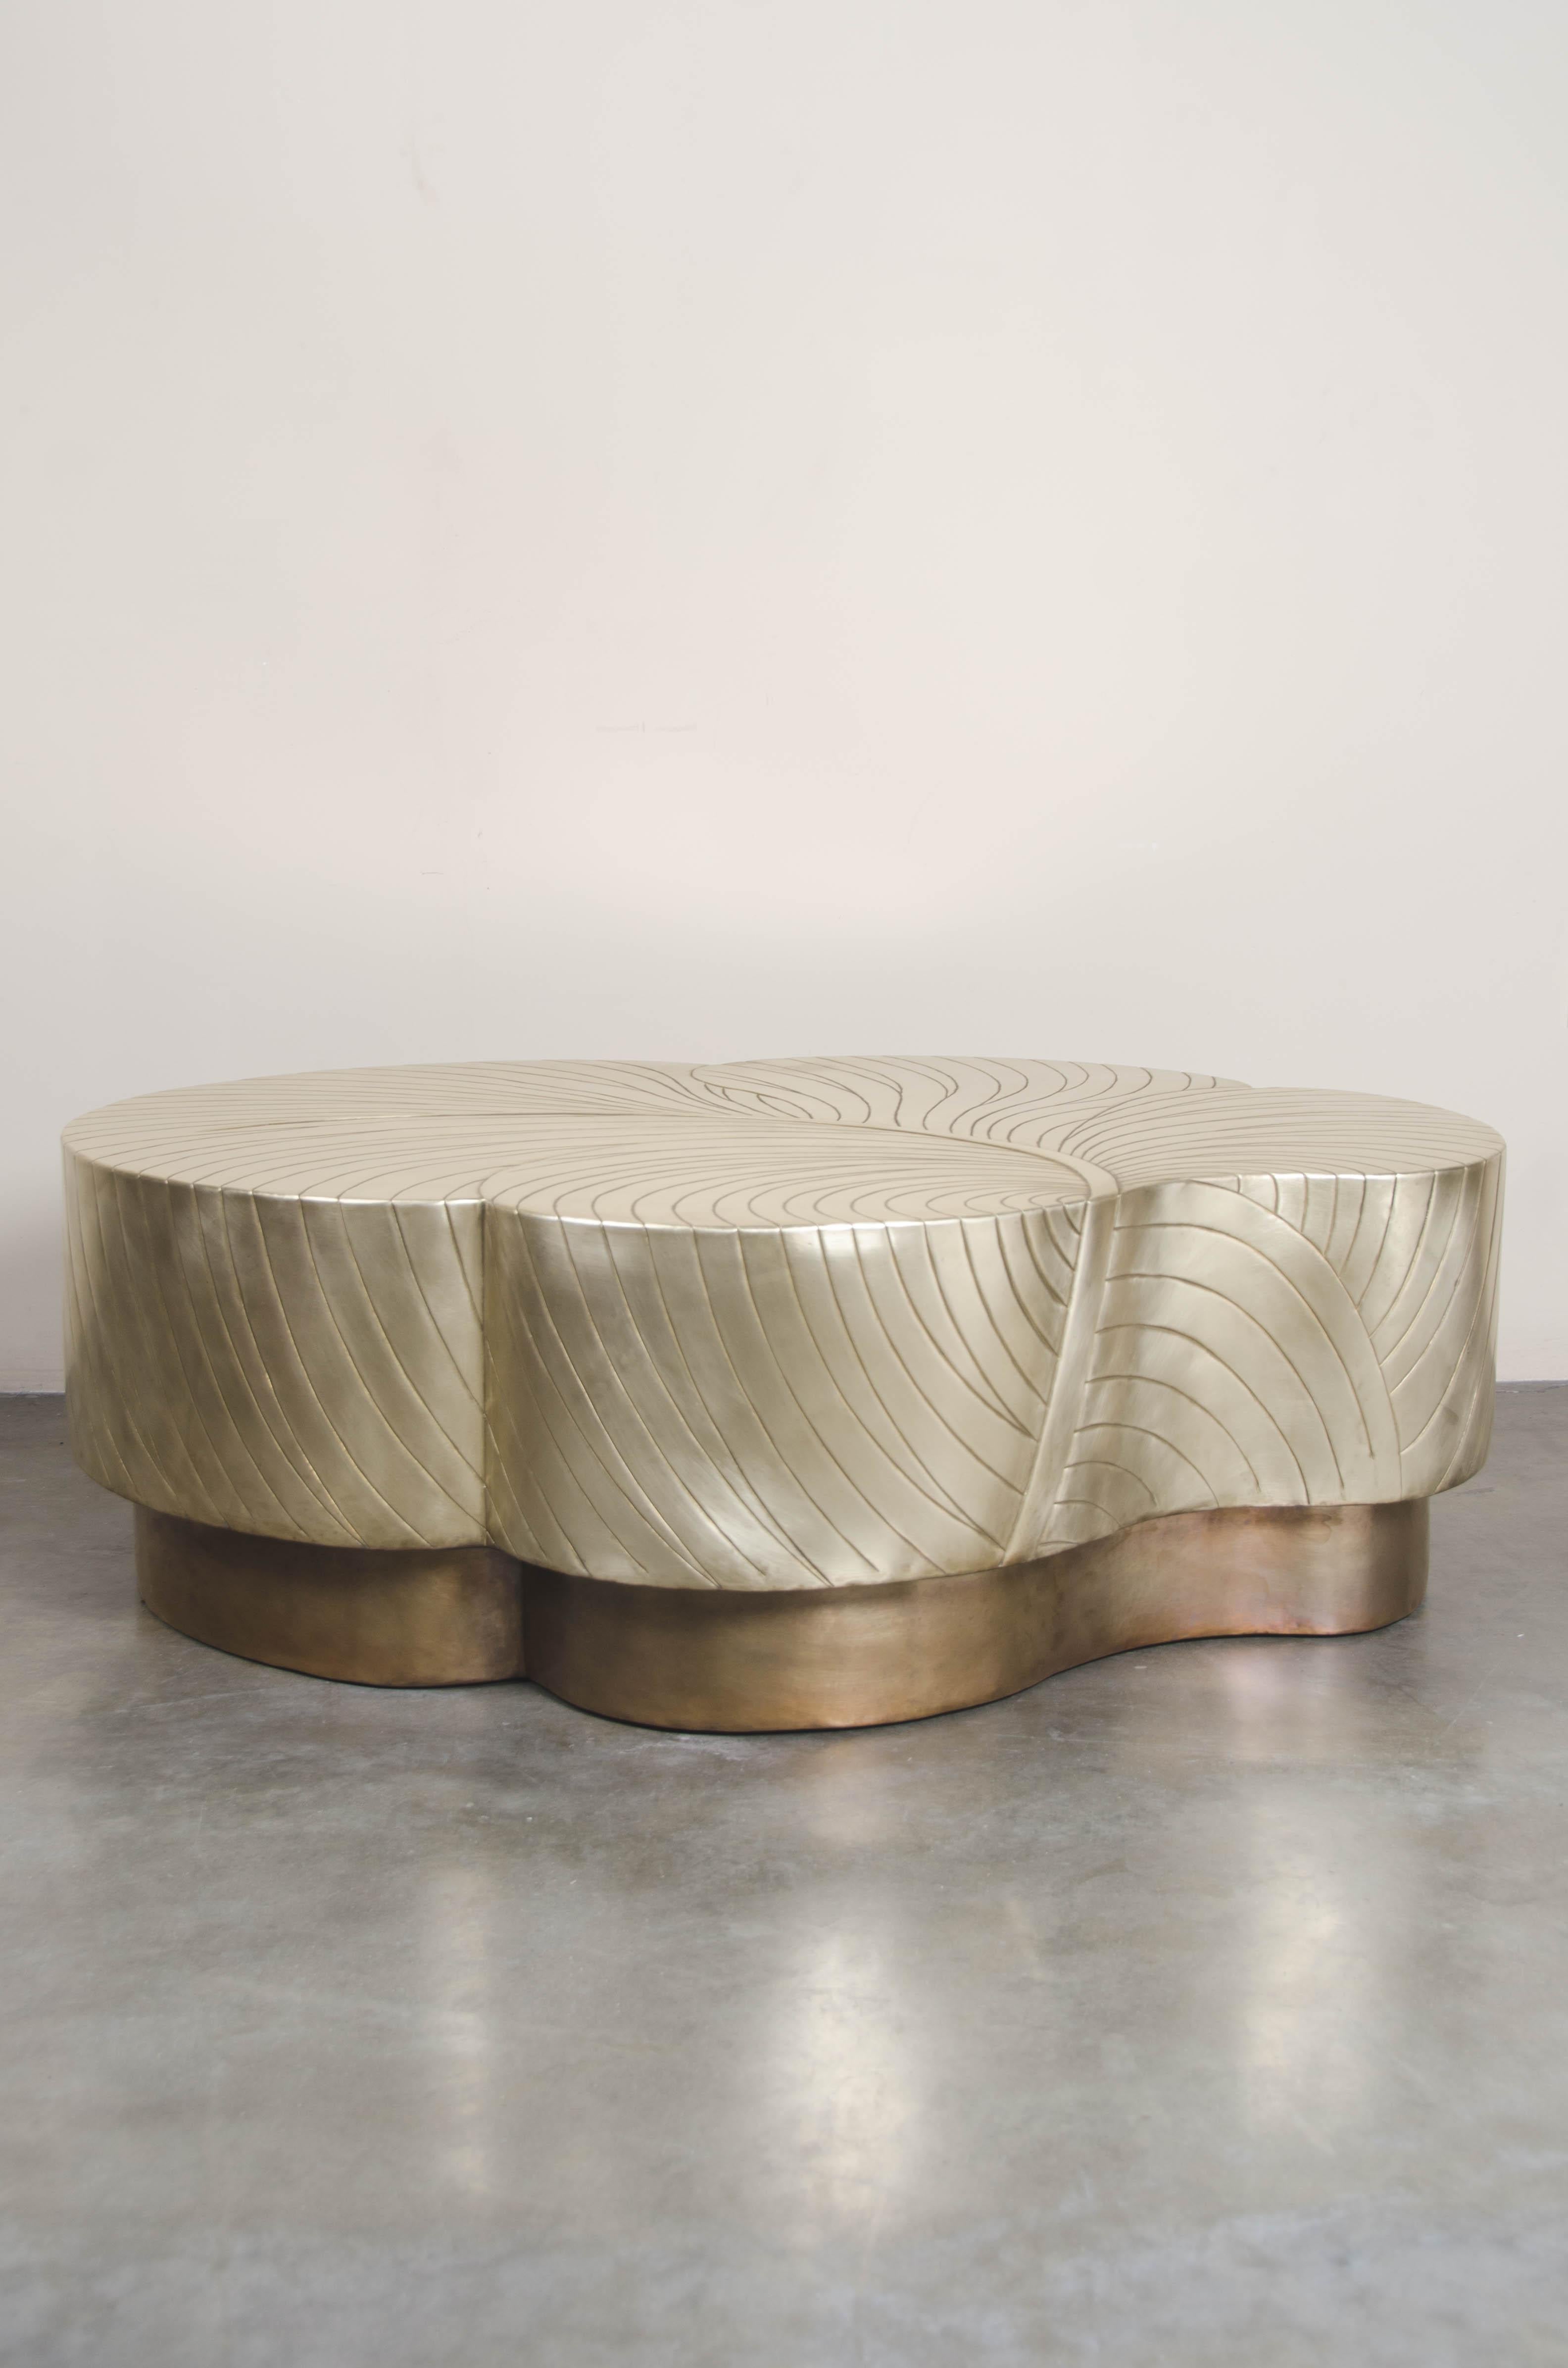 Leaf design cocktail table 
Brass
Hand Repoussé
Limited Edition
Each piece is individually crafted and is unique. 
Repoussé is the traditional art of hand-hammering decorative relief onto sheet metal. The technique originated around 800 BC